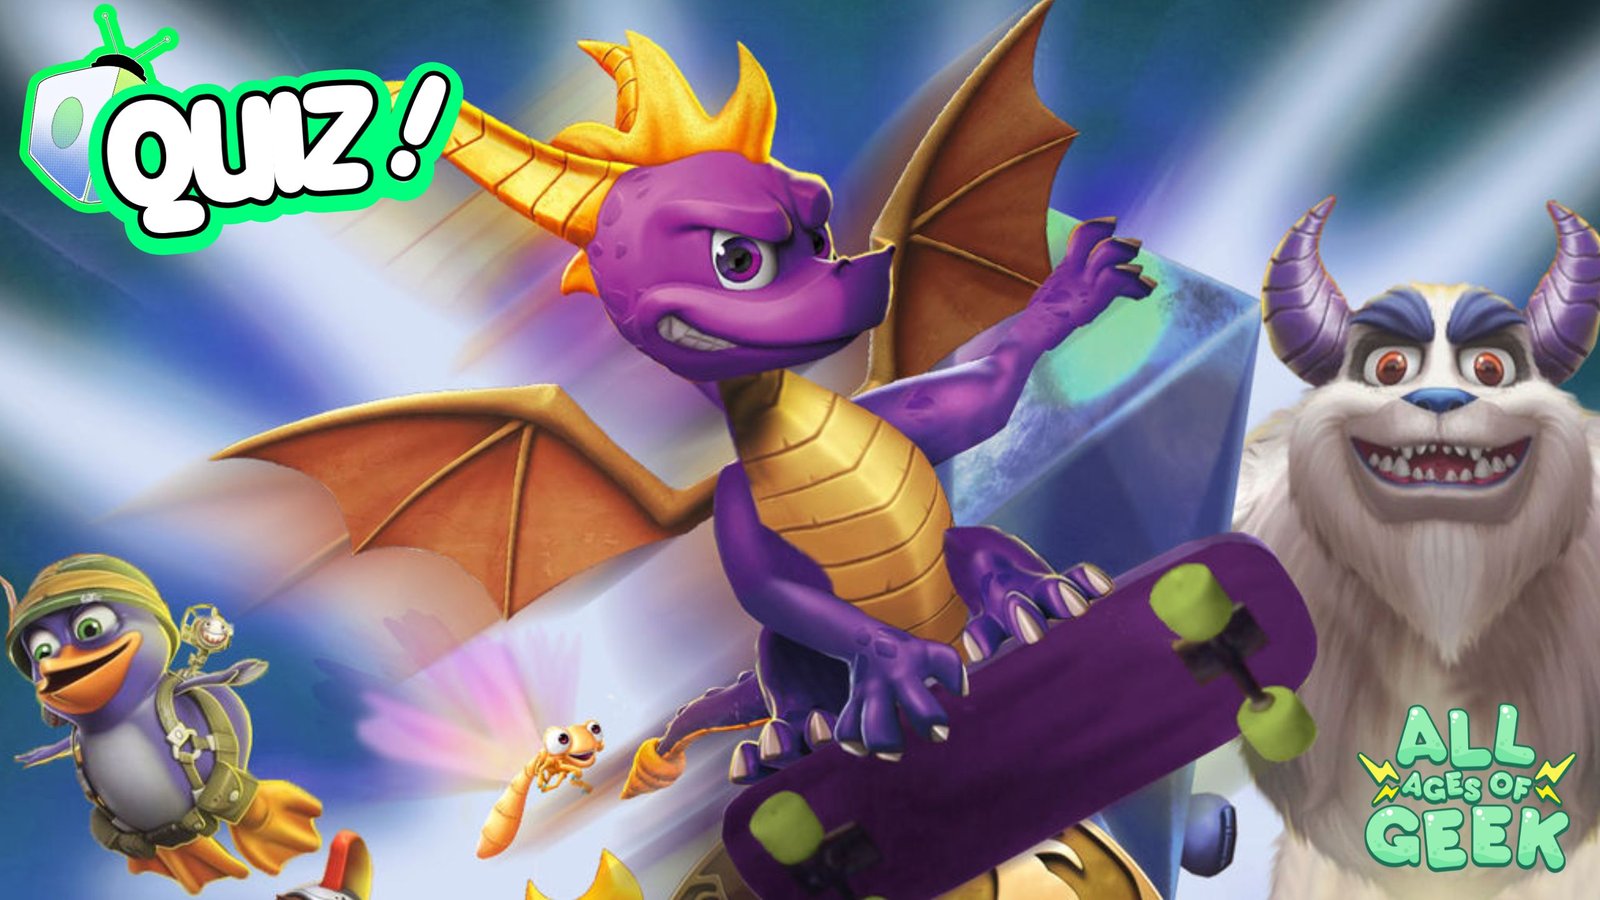 Which Spyro Character Are You? Take the Quiz to Find Out!